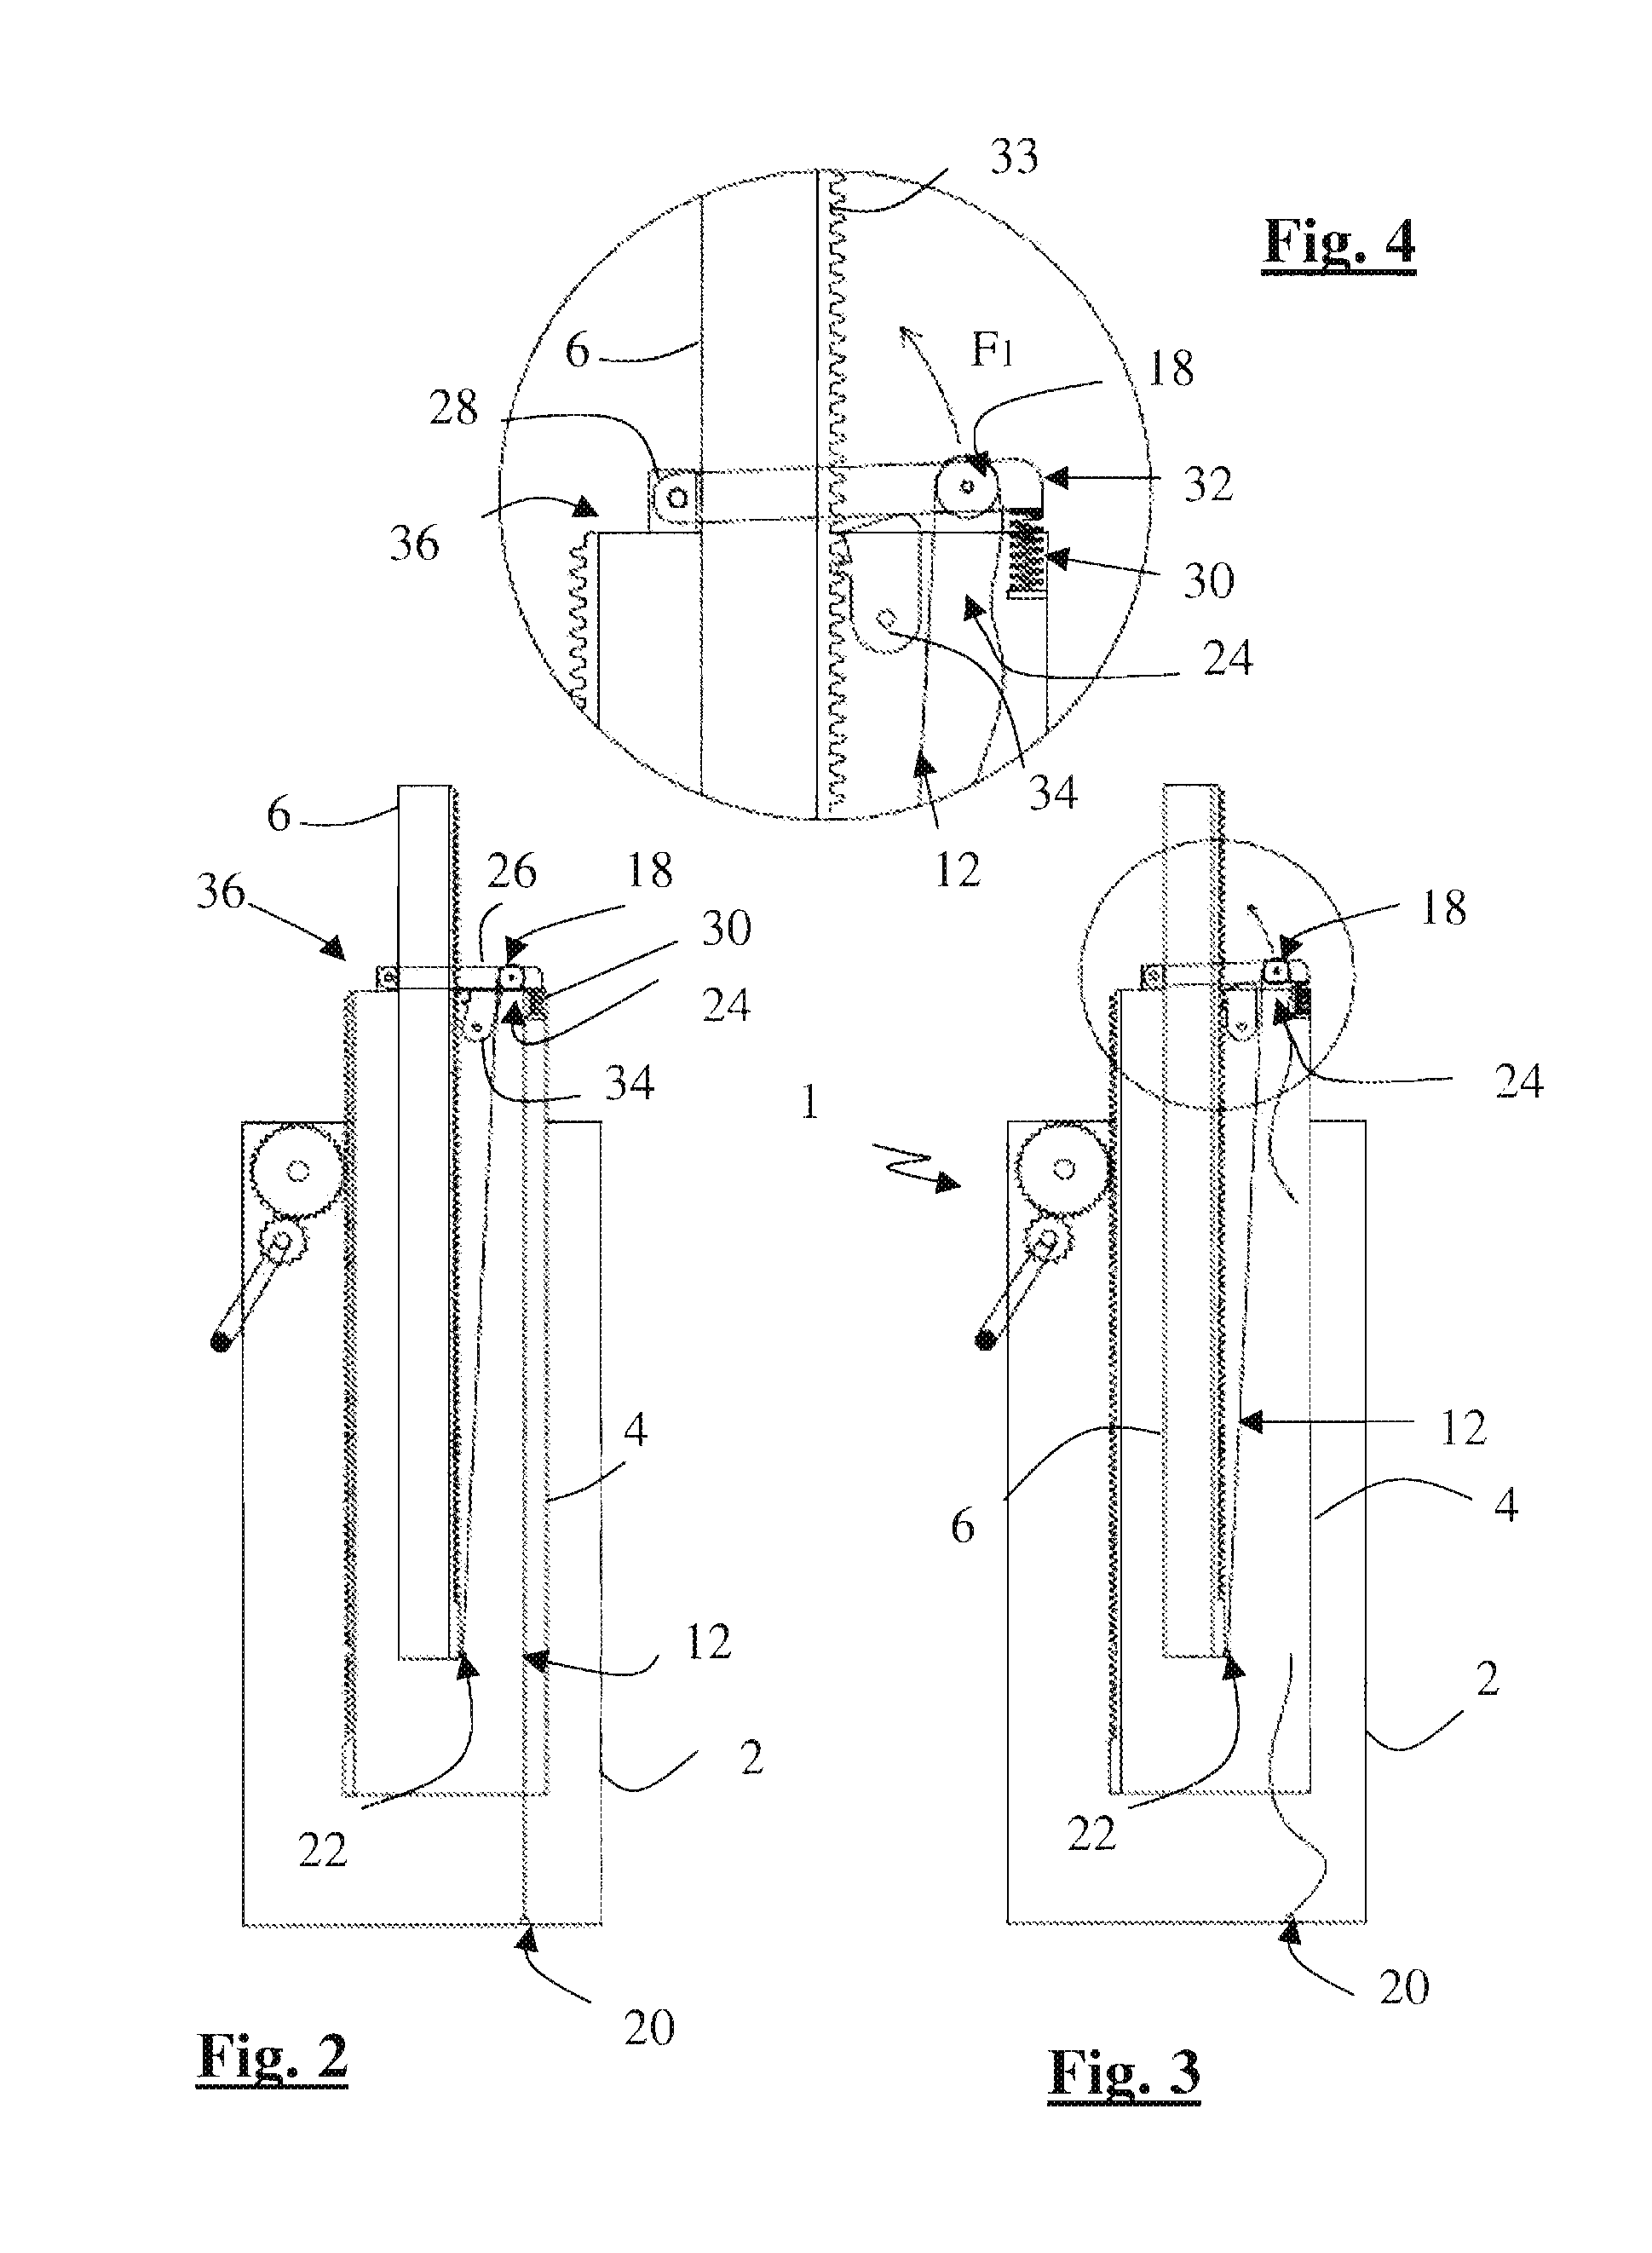 Telescopic lifting device with safety strap